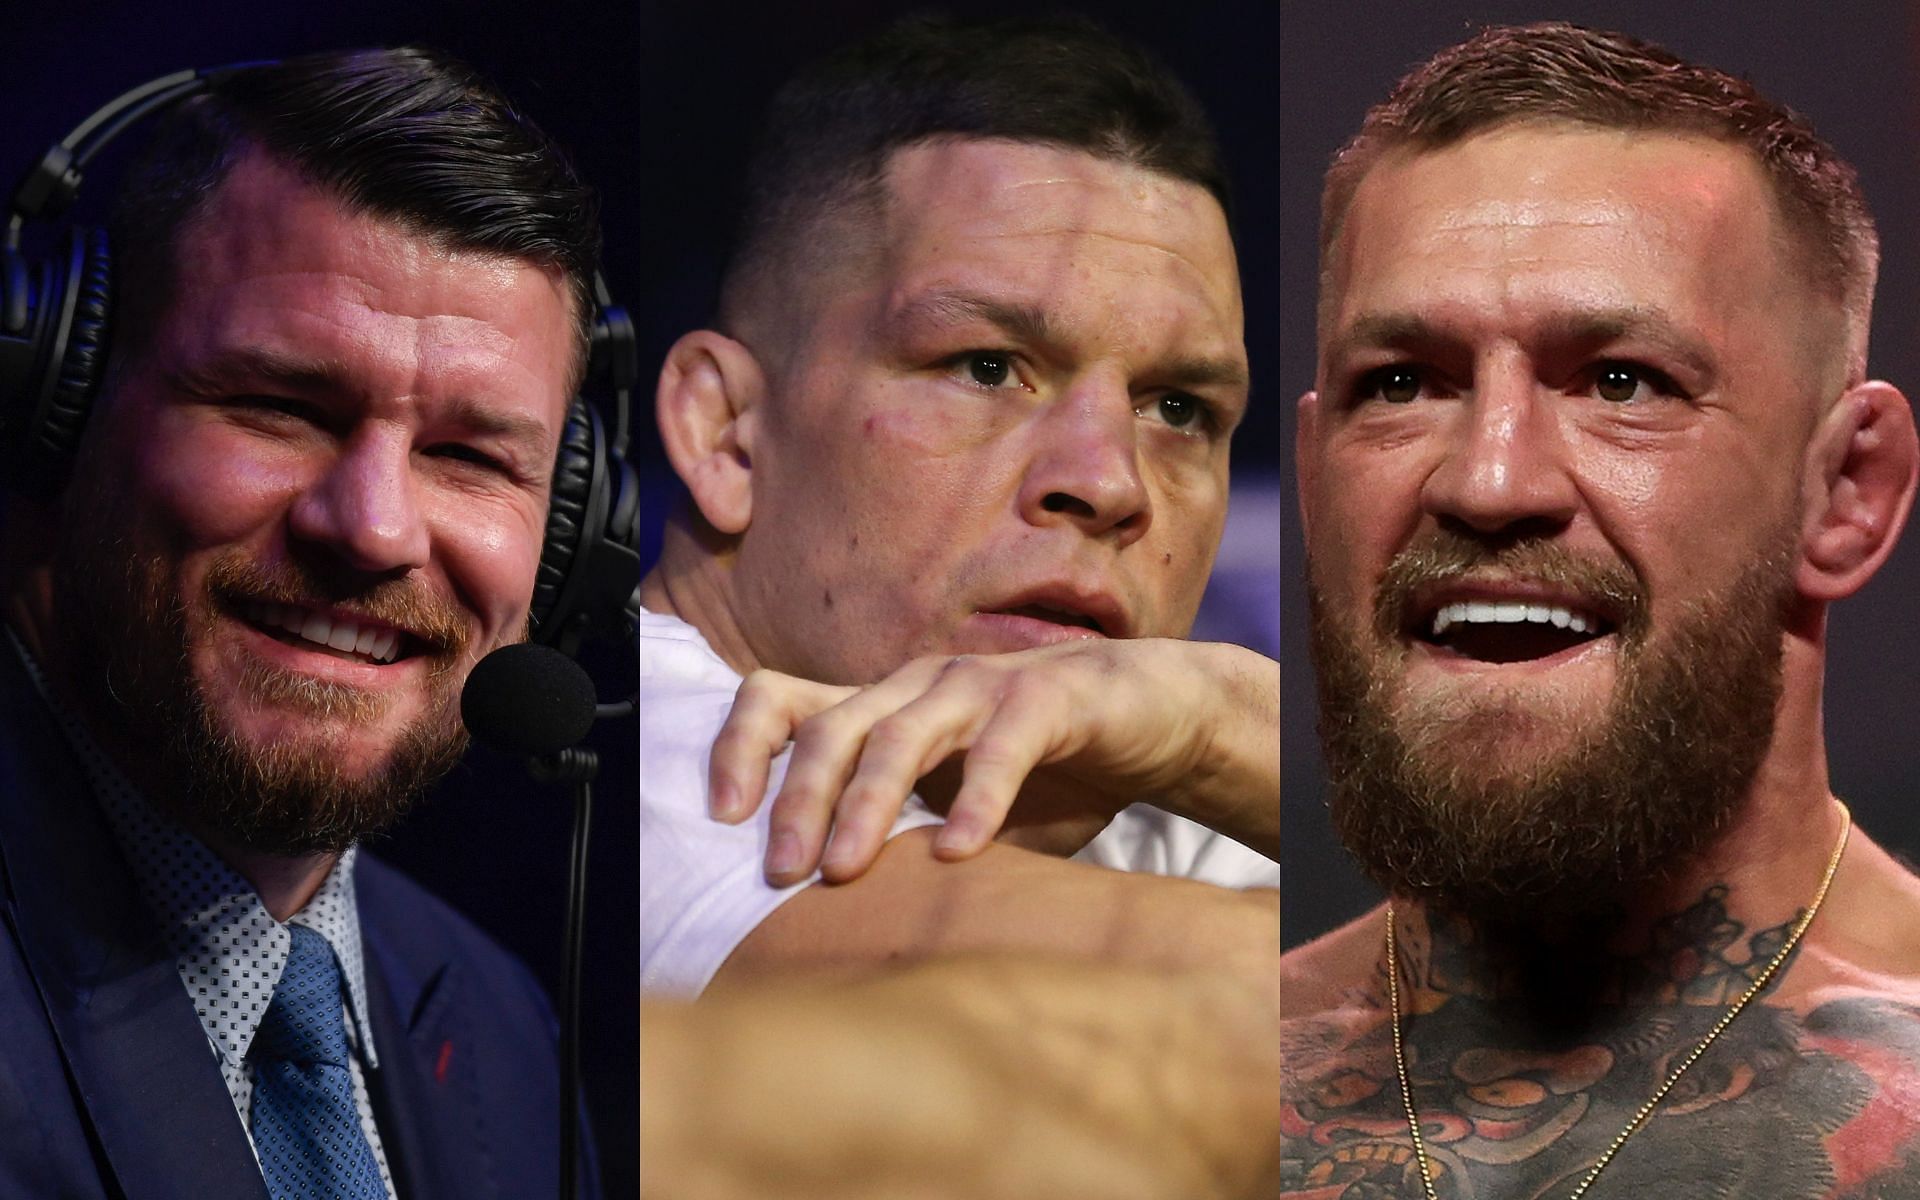 Michael Bisping (Left), Nate Diaz (Middle), and Conor McGregor (Right)